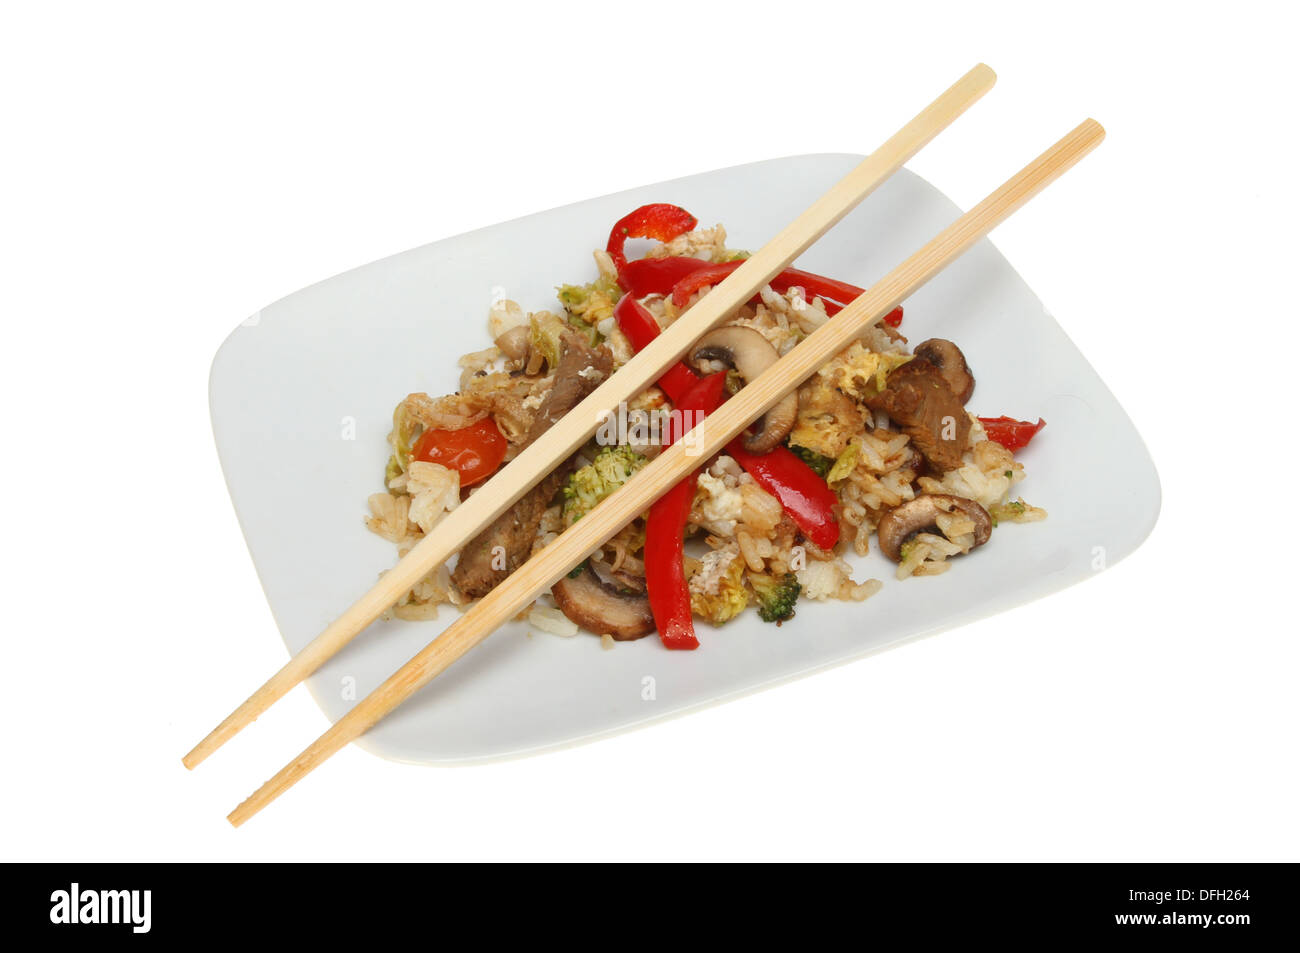 Beef stir fry with chopsticks on a plate isolated against white Stock Photo